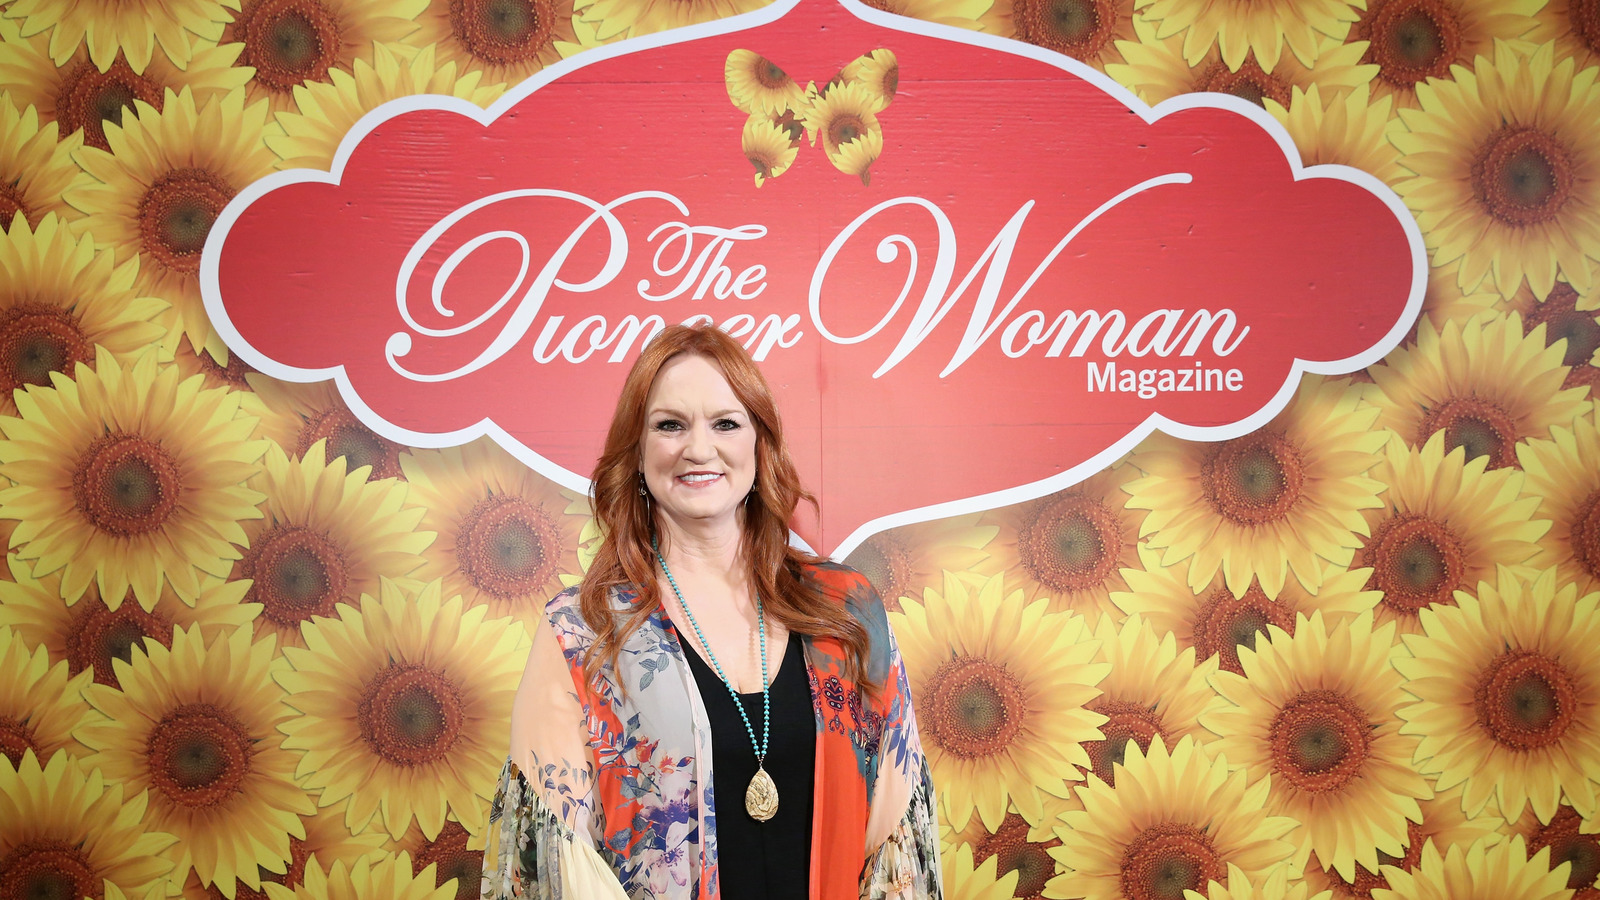 If you really want to see Ree Drummond, aka The Pioneer Woman